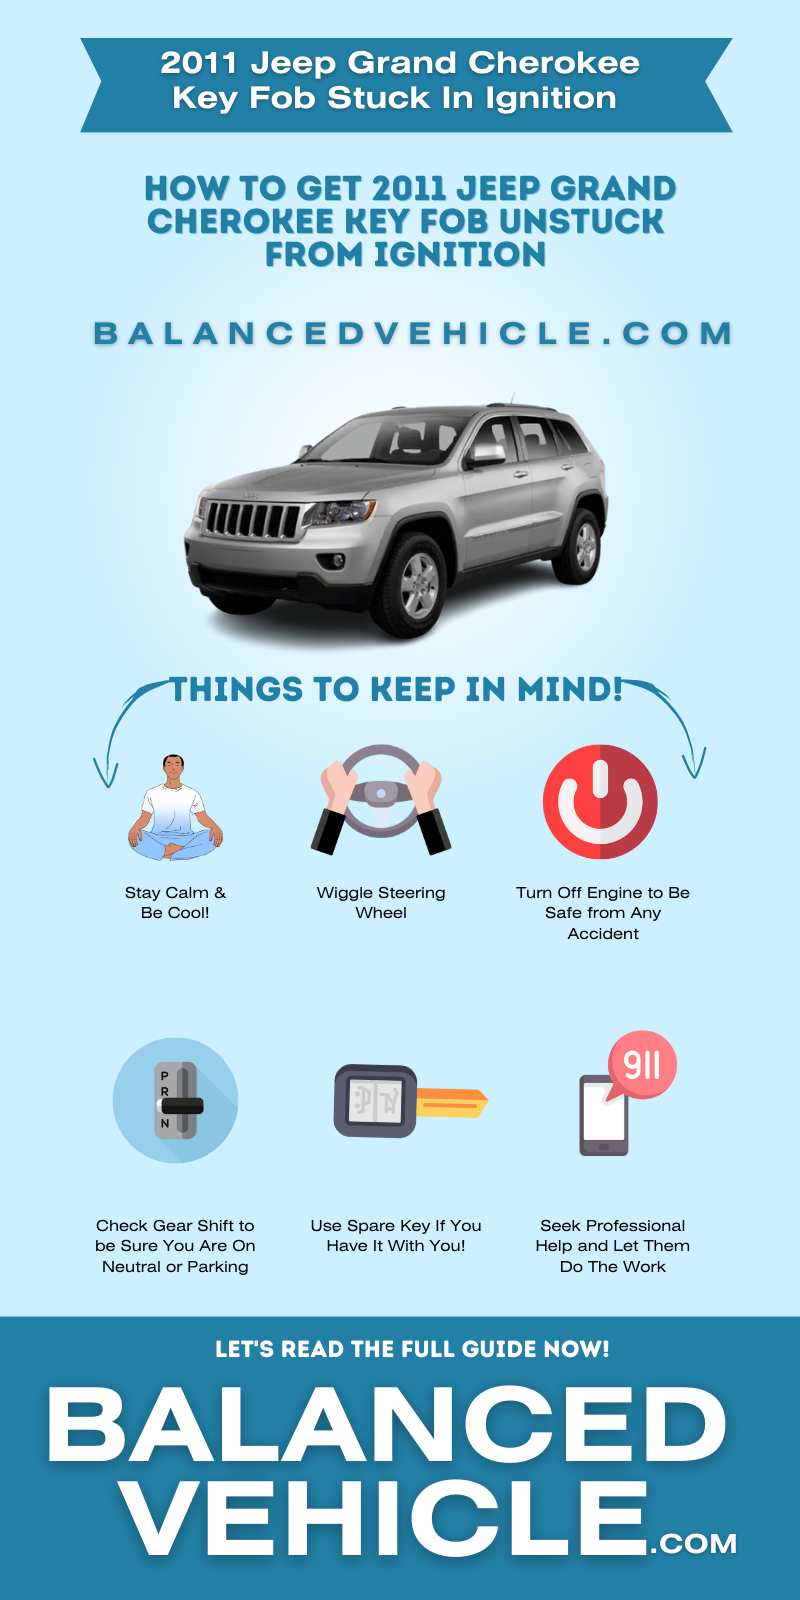 2011 Jeep Grand Cherokee Key Fob Stuck In Ignition - Infographic 